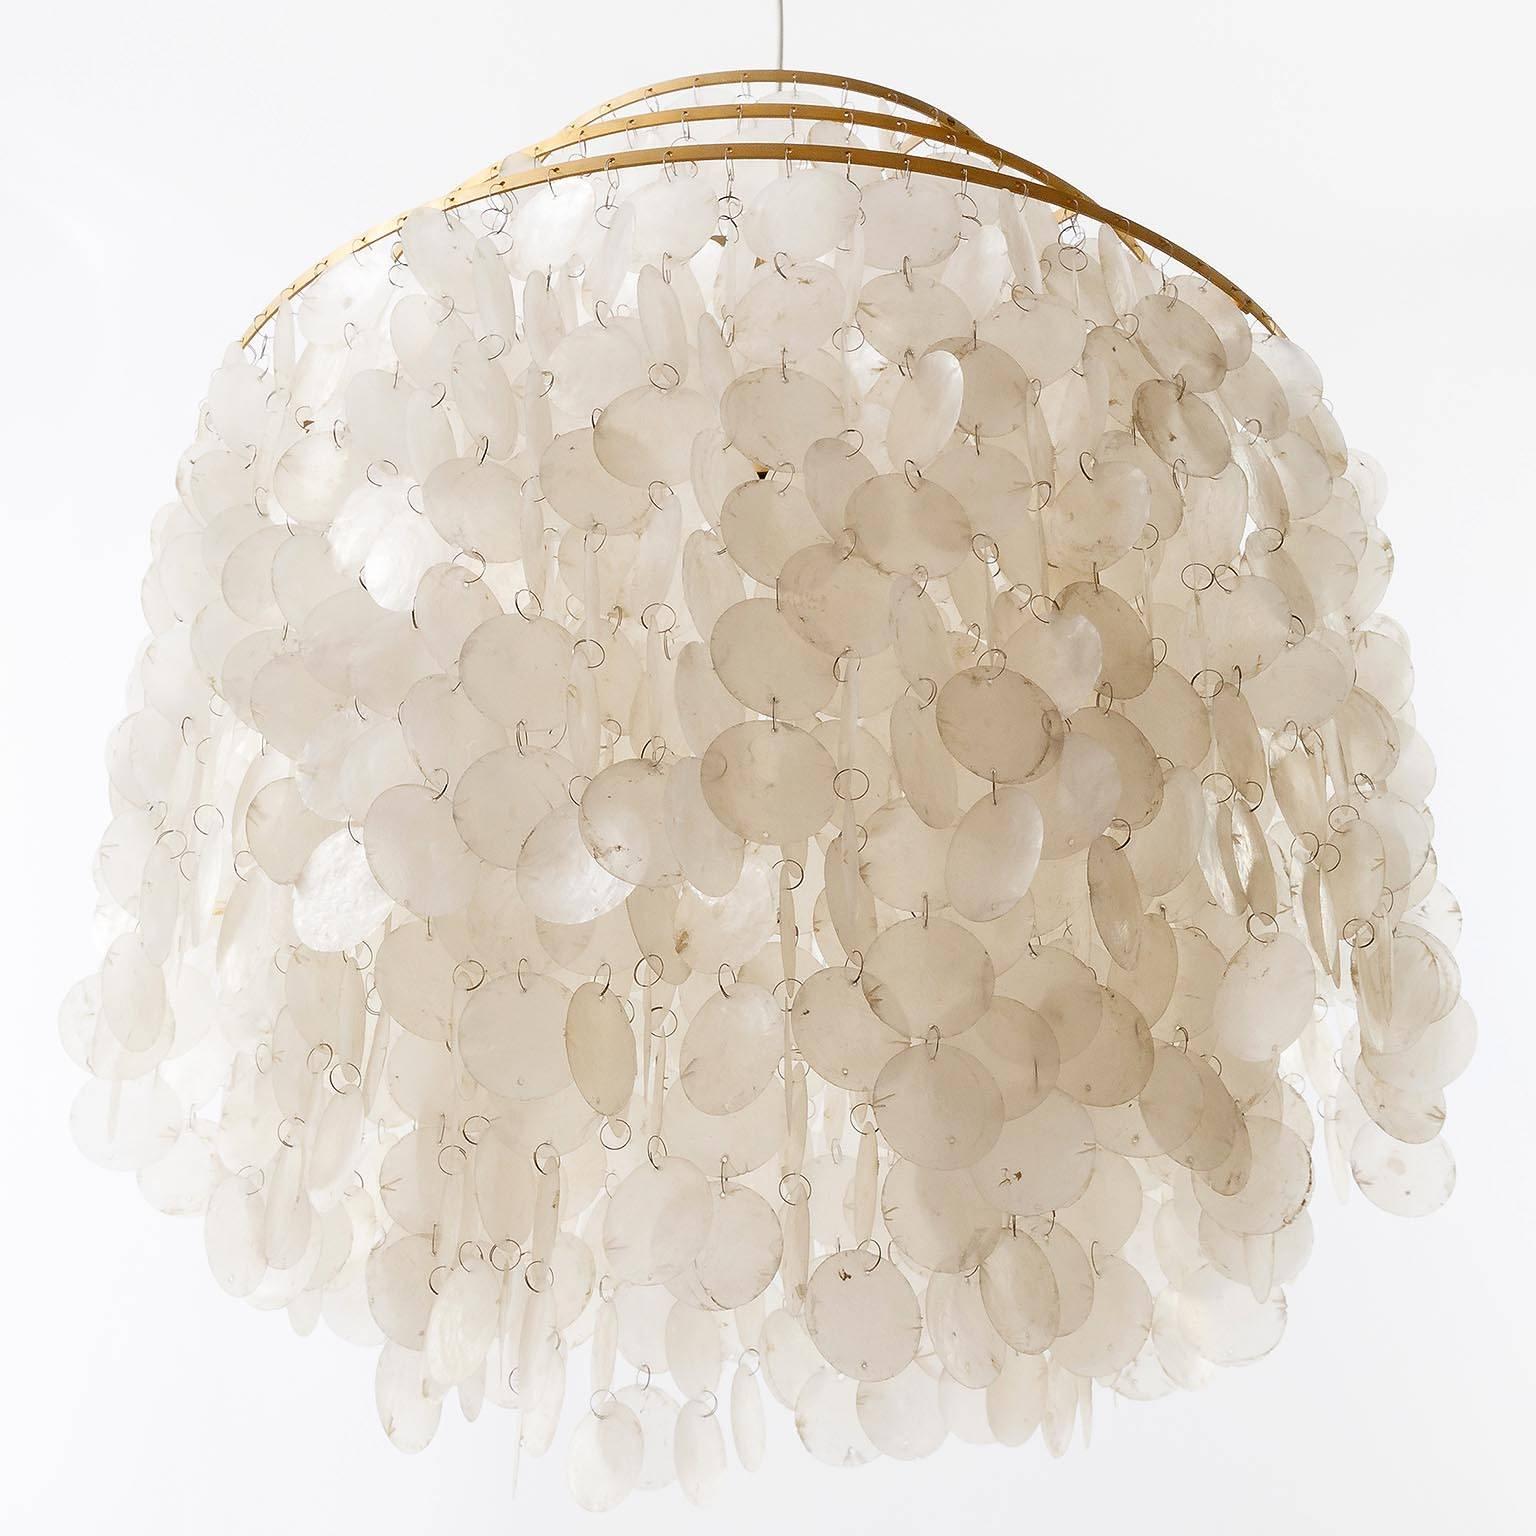 An impressive three-tier sea shell chandelier / pendant light designed by Verner Panton for the Swiss manufacturer J. Luber Ag. An original vintage piece manufactured in Mid-Century (1960s-1970s).
Hundreds of sea shells are hanging on three rings